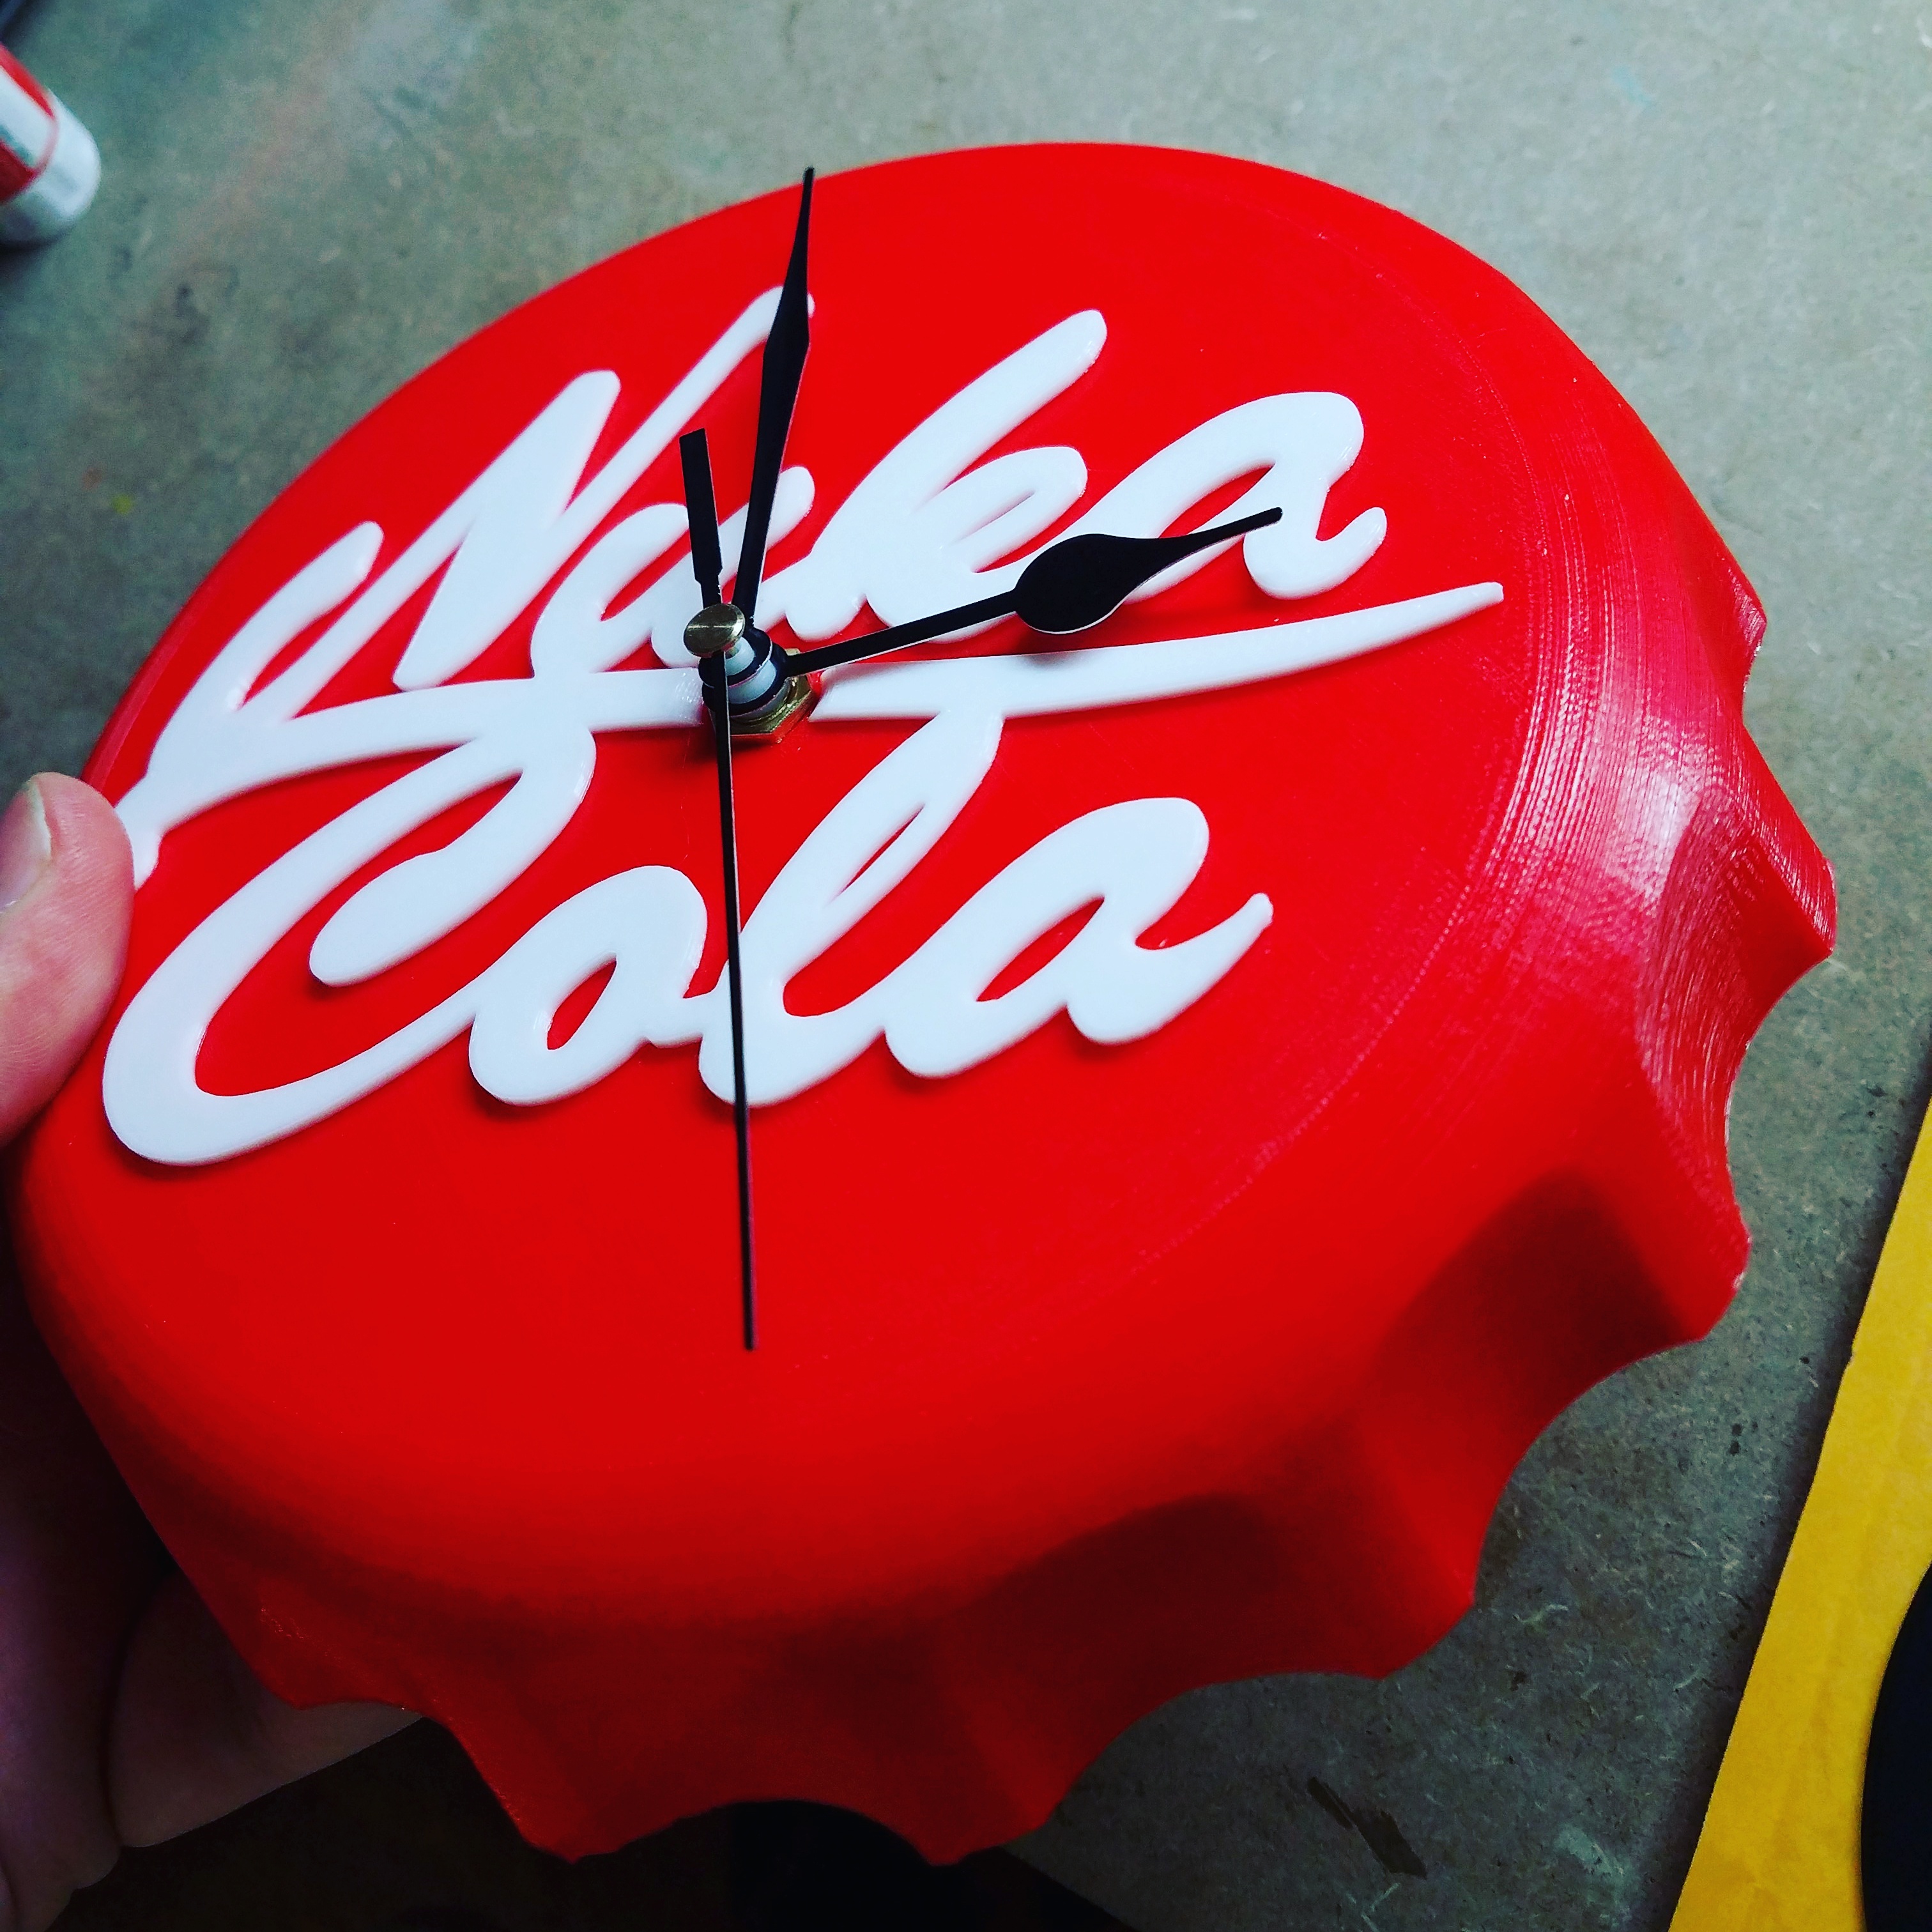 nuka-cola-clock-by-tech-outreach-download-free-stl-model-printables